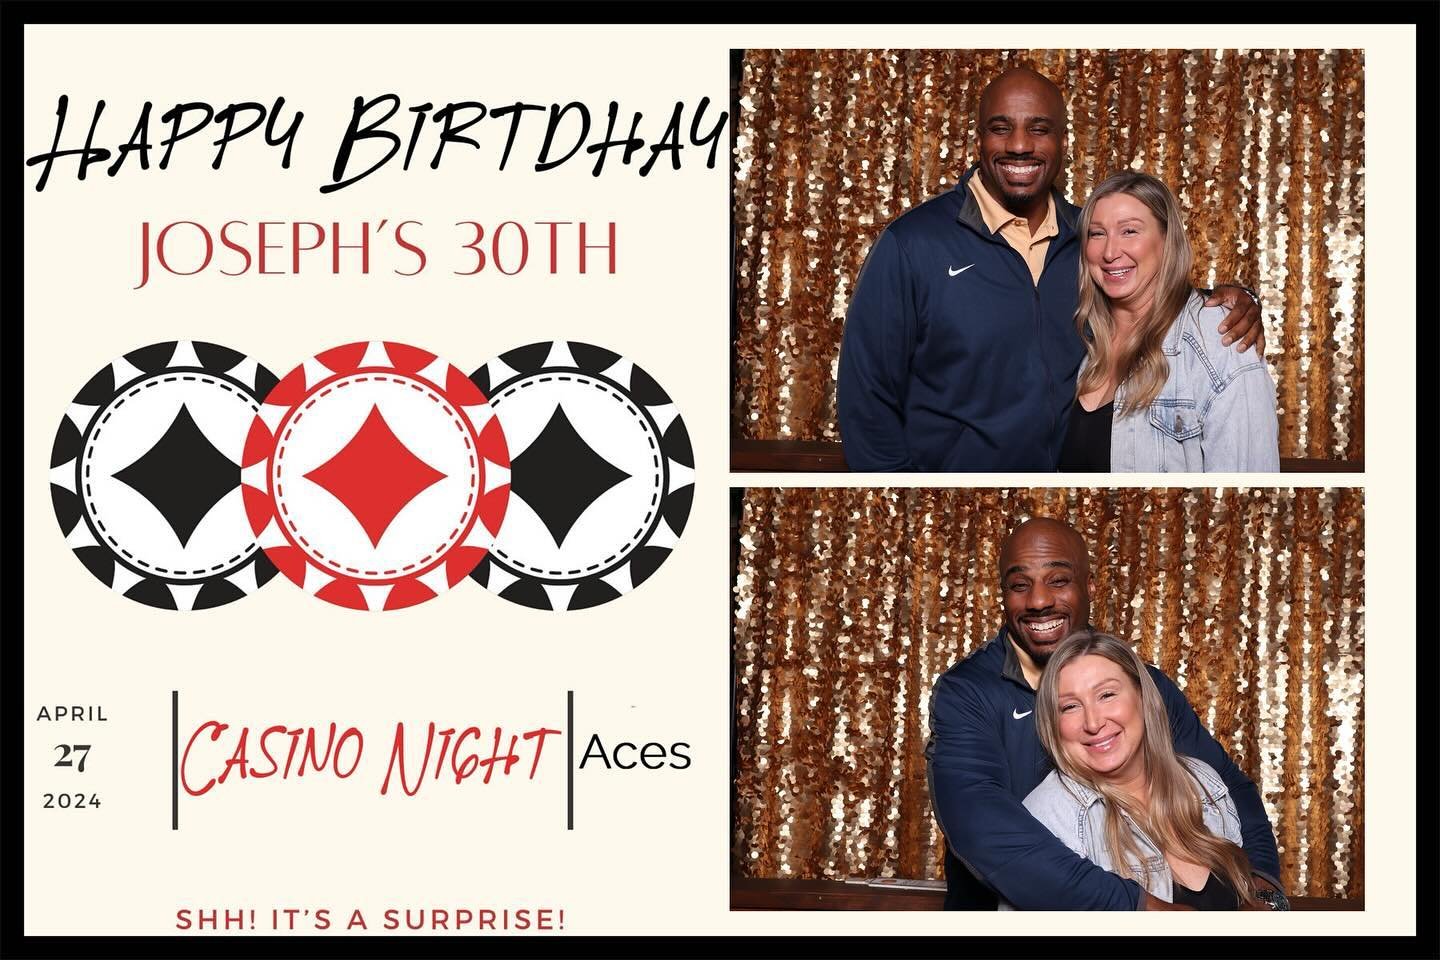 @jaminebryant &amp; Ron ruling the blackjack table at Joseph&rsquo;s casino #birthday party @cloudninephotobooth